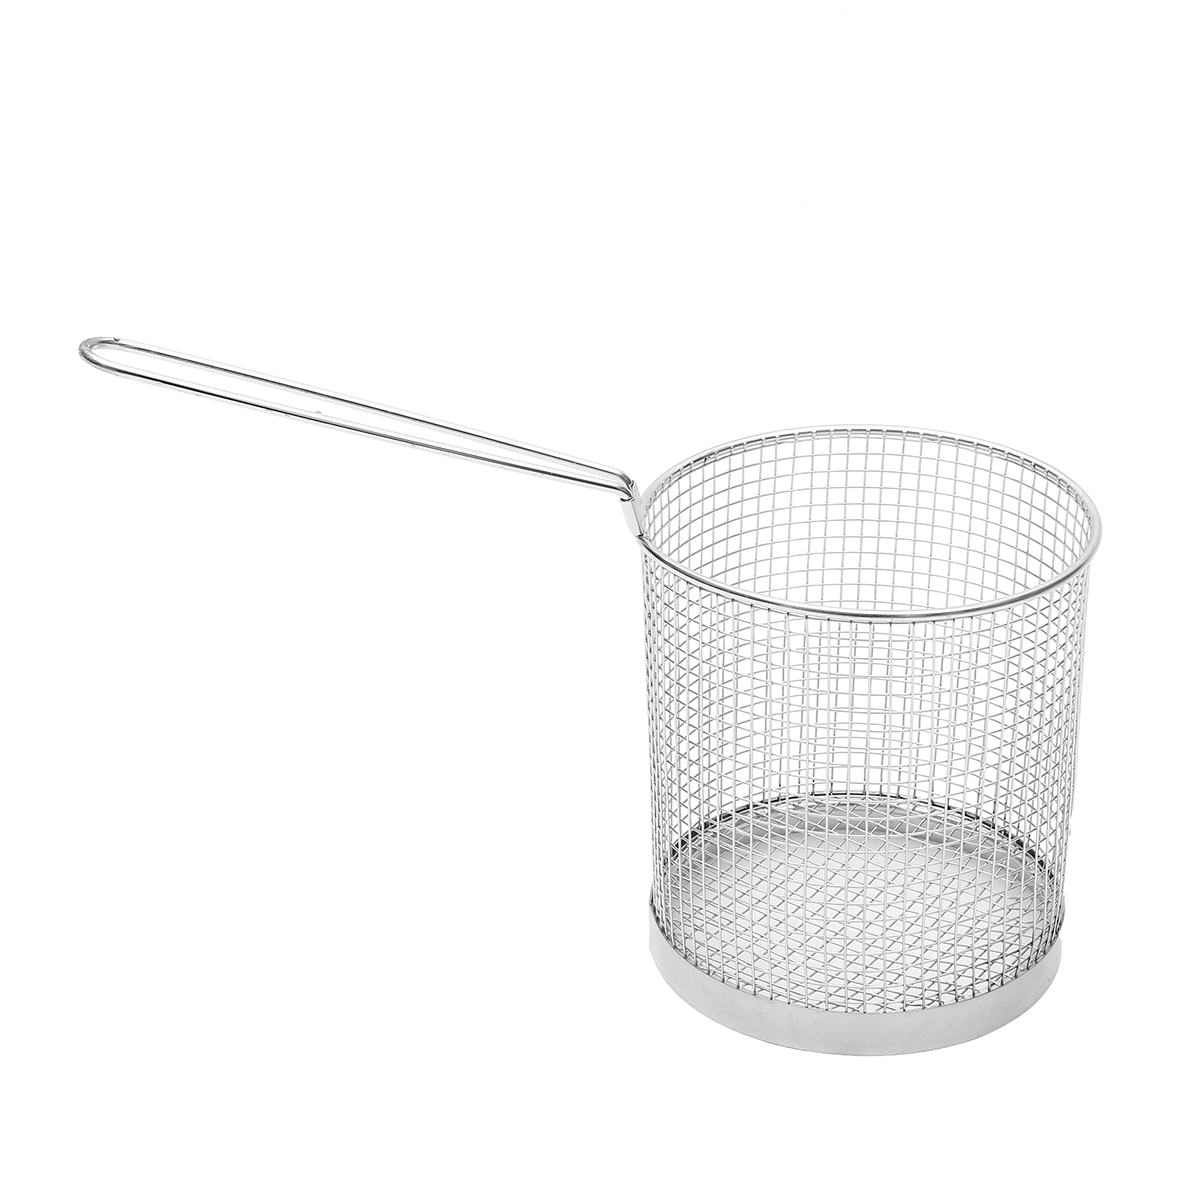 Stainless-Steel-Round-Fry-Basket-Long-Handle-Fried-Scampi-Chips-Chicken-Fryer-Strainer-1229014